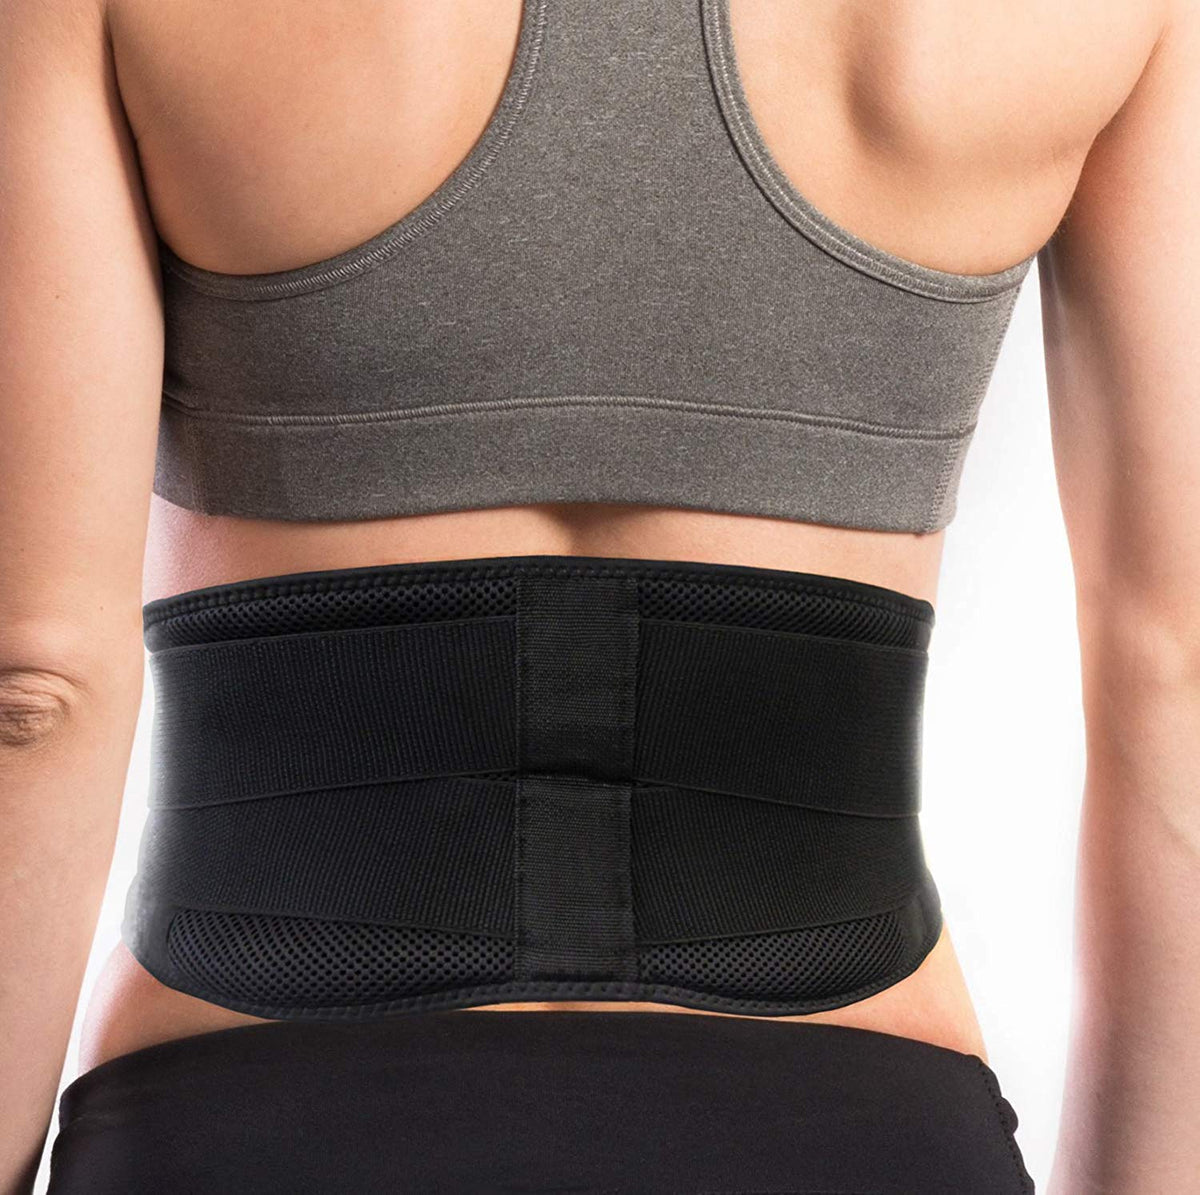 AllyFlex Sports Small Back Brace for Female Lower Back Pain - Breathable  Lumbar Support Belt for Women and Men Slim Fit Under Clothes to Improve